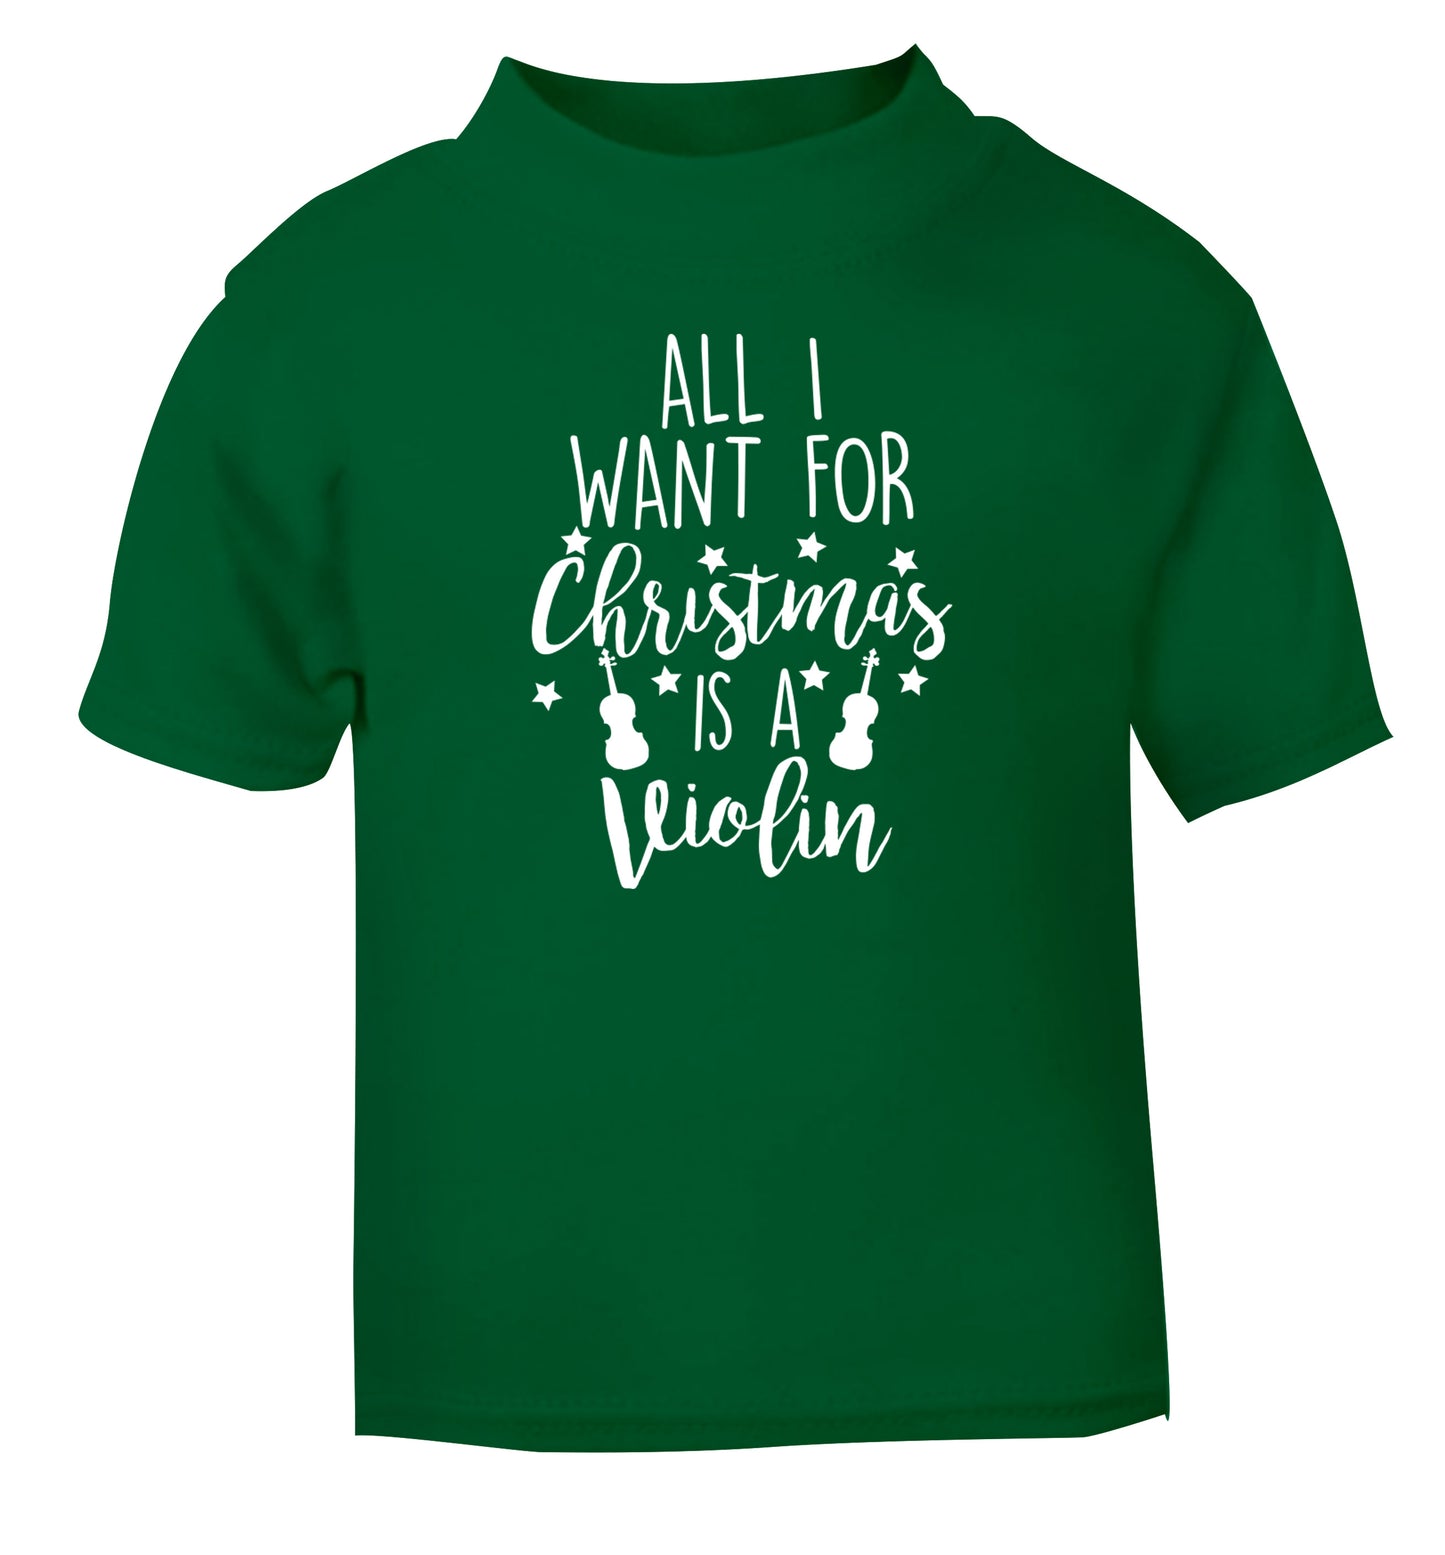 All I Want For Christmas is a Violin green Baby Toddler Tshirt 2 Years